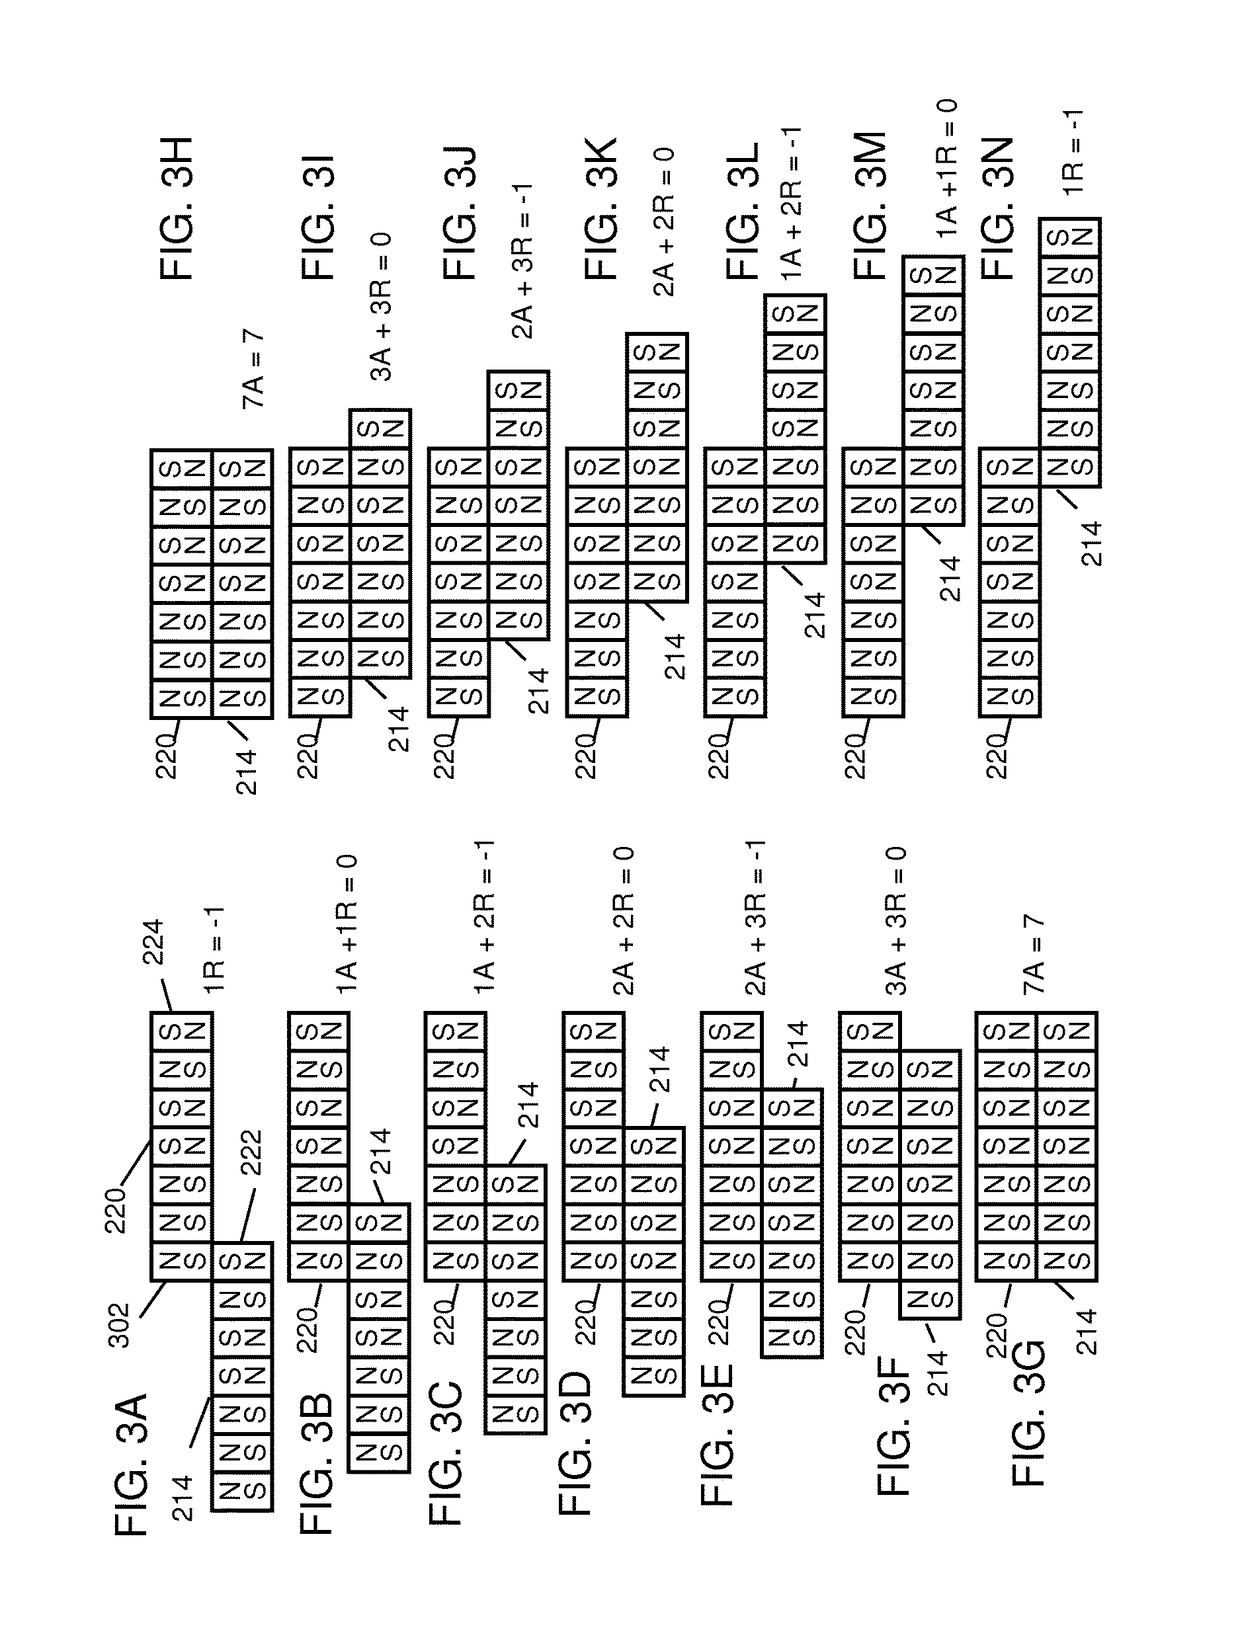 Method for assembling a magnetic attachment mechanism